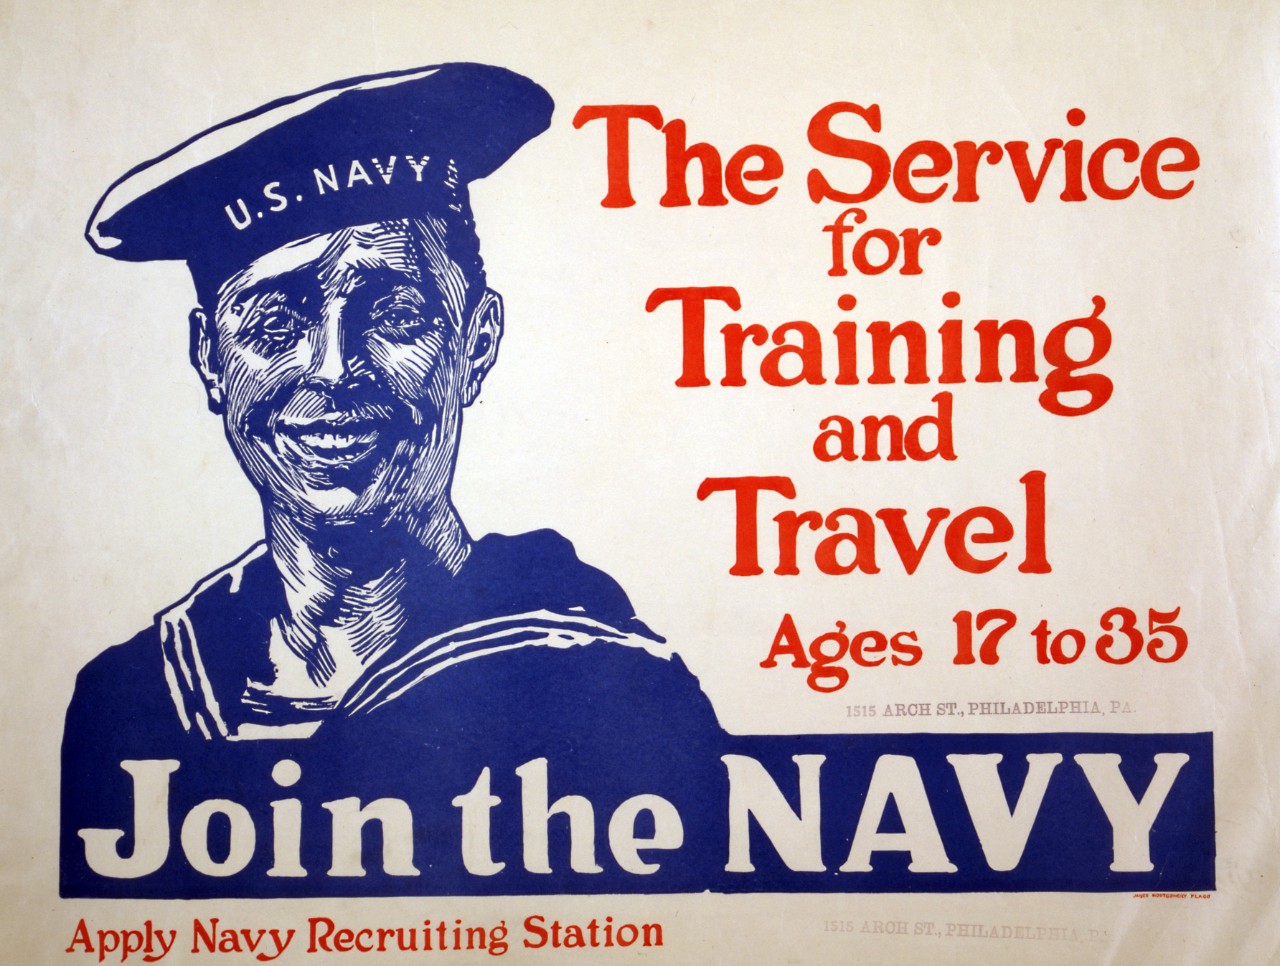 <p>LC-USZC4-10233: WWI Recruiting Poster – “The Service for Training and Travel Ages 17 to 35 / Join the NAVY / Apply Navy Recruiting Station.”</p>